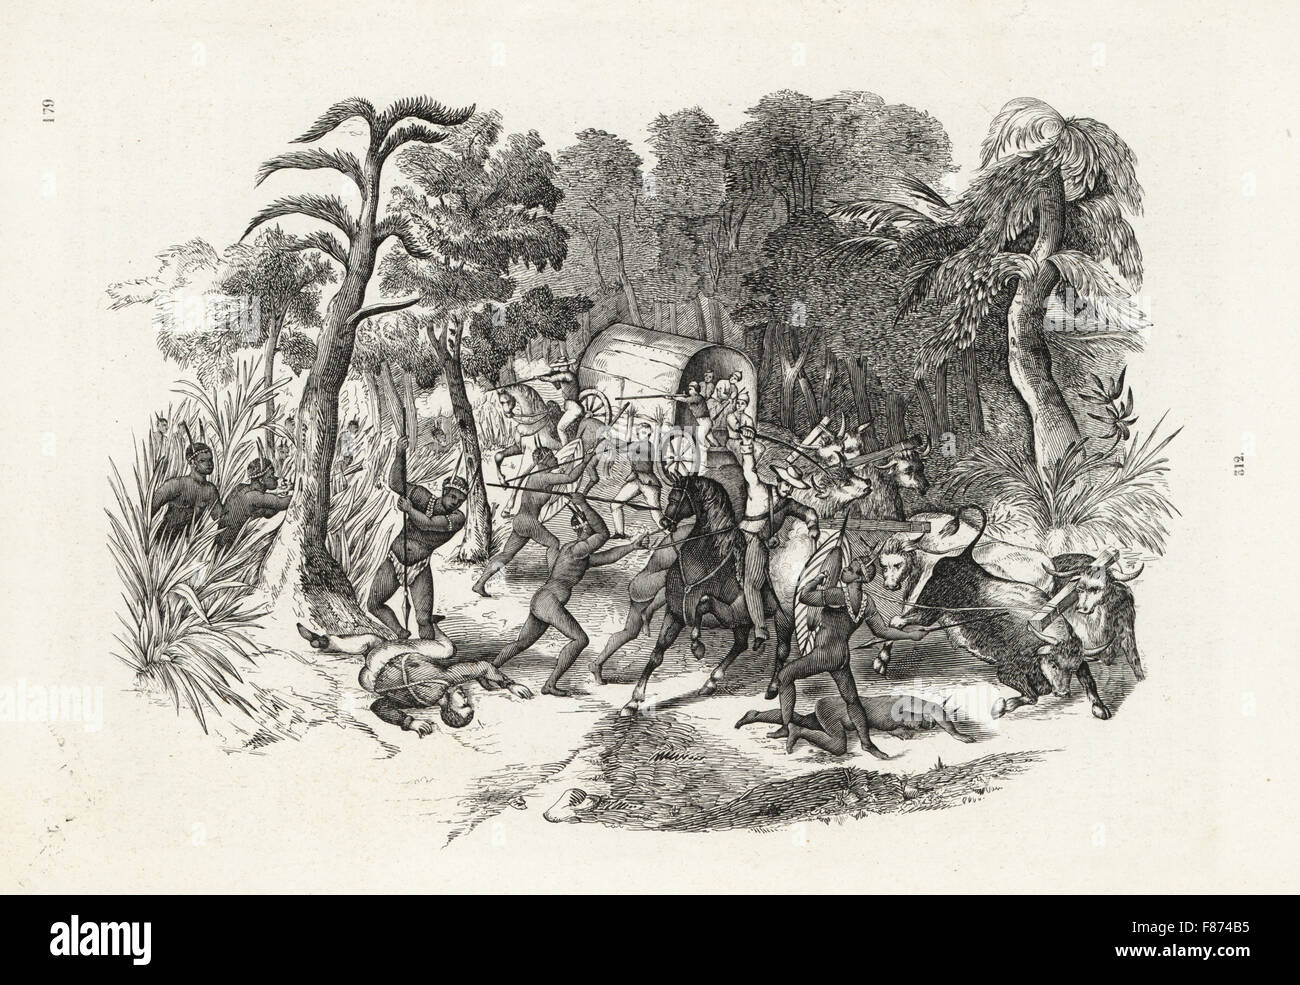 European plant hunters attacked by natives of South Africa in the mid-19th century. Woodblock engraving from Louis van Houtte and Charles Lemaire's Flowers of the Gardens and Hothouses of Europe, Flore des Serres et des Jardins de l'Europe, Ghent, Belgium, 1851. Stock Photo